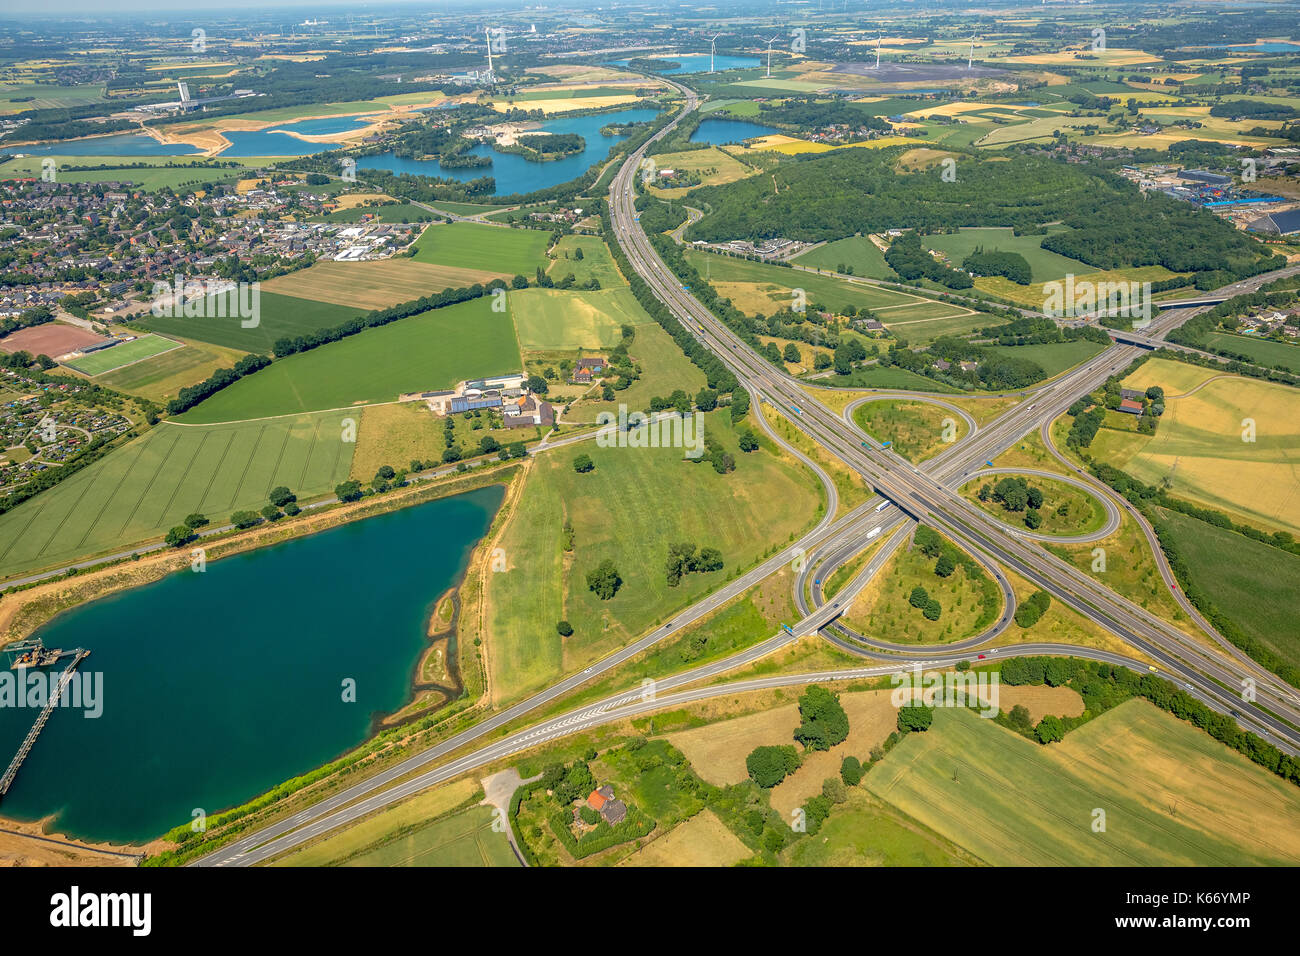 Motorway junction A57 and A52, the end of de A52, FRIKA gravel GmbH & Co. KG, gravel pit, quarry pond Haarbeck road, Kamp-Lintfort, Ruhr area, North R Stock Photo